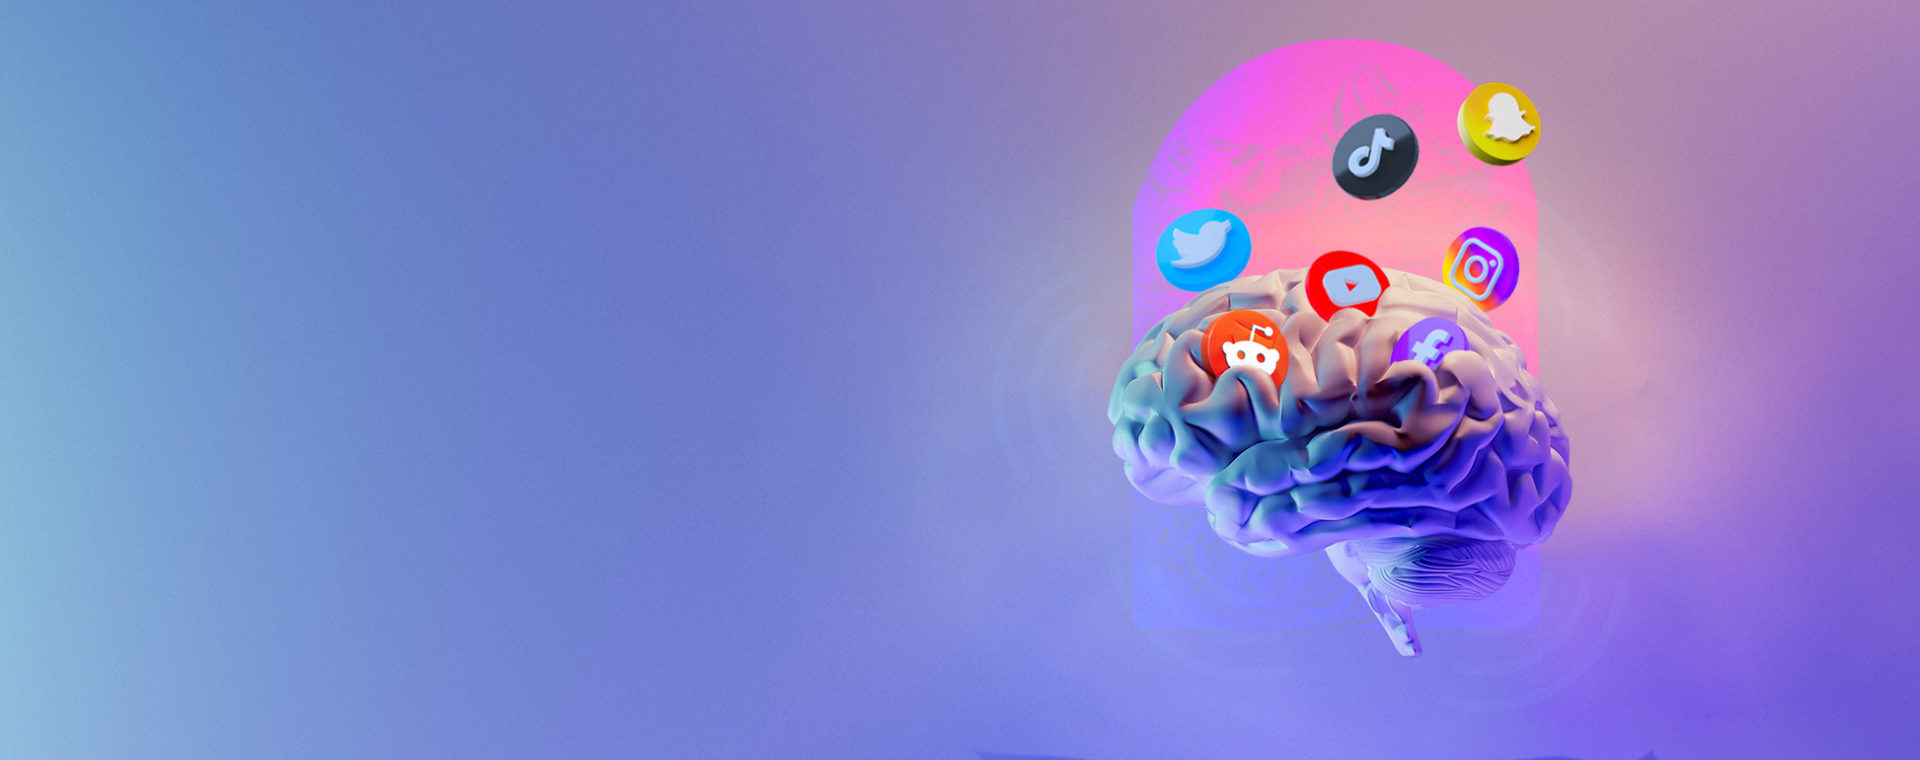 Purple background with an image that looks like a brain with social media icons floating out of it.